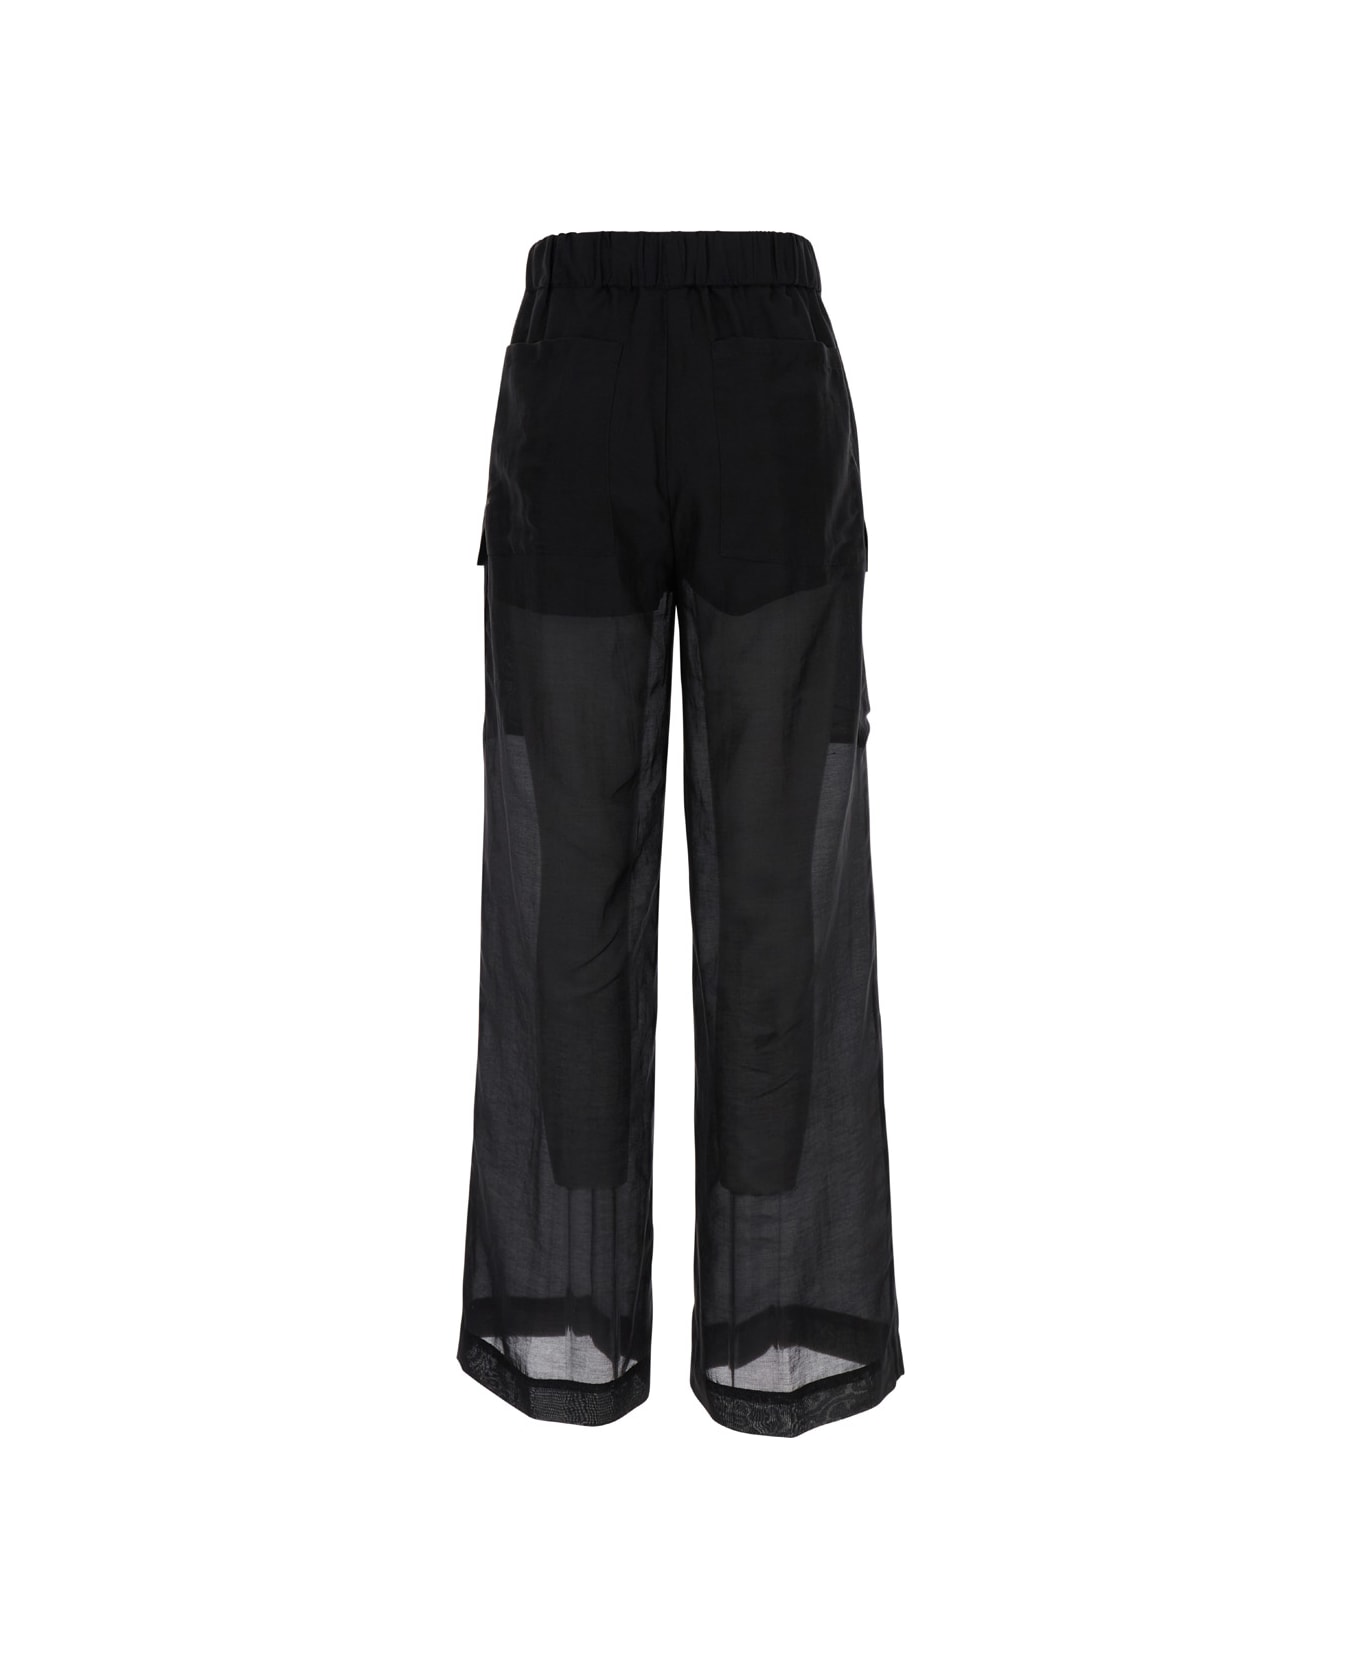 SEMICOUTURE Black Trousers With Pockets In Cotton And Silk Woman - Black ボトムス